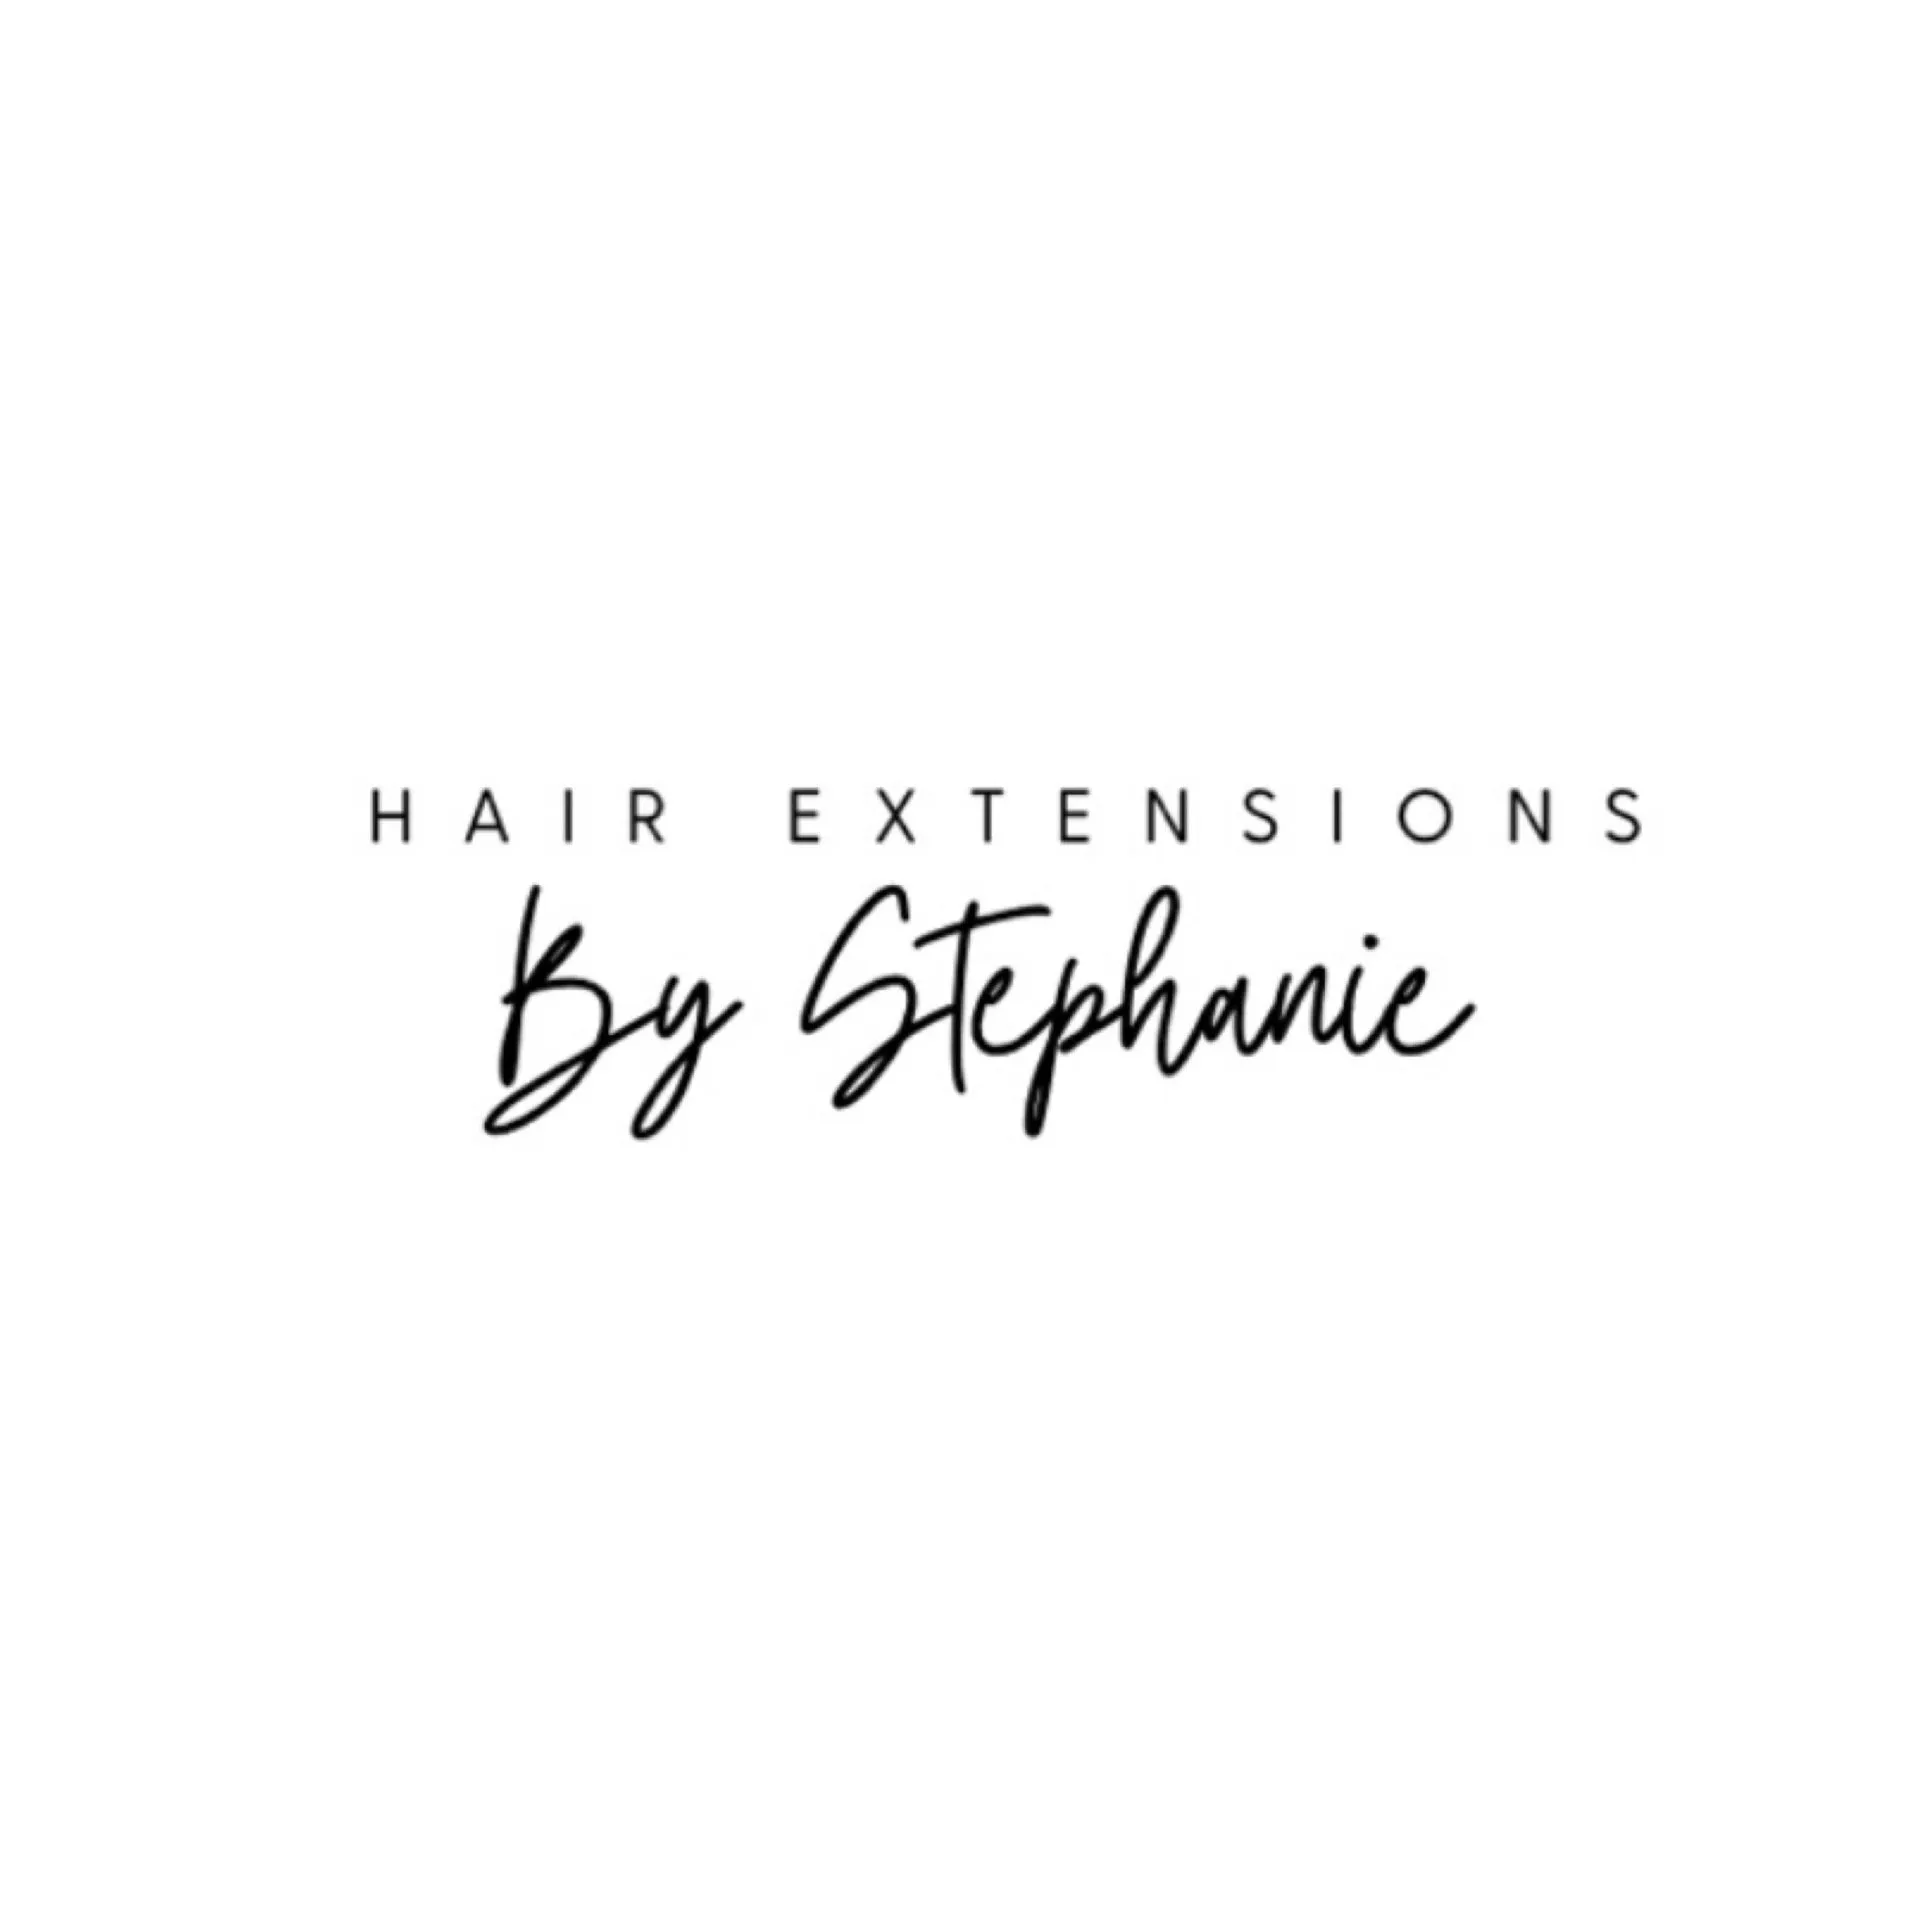 A logo for hair extensions by stephanie on a white background.